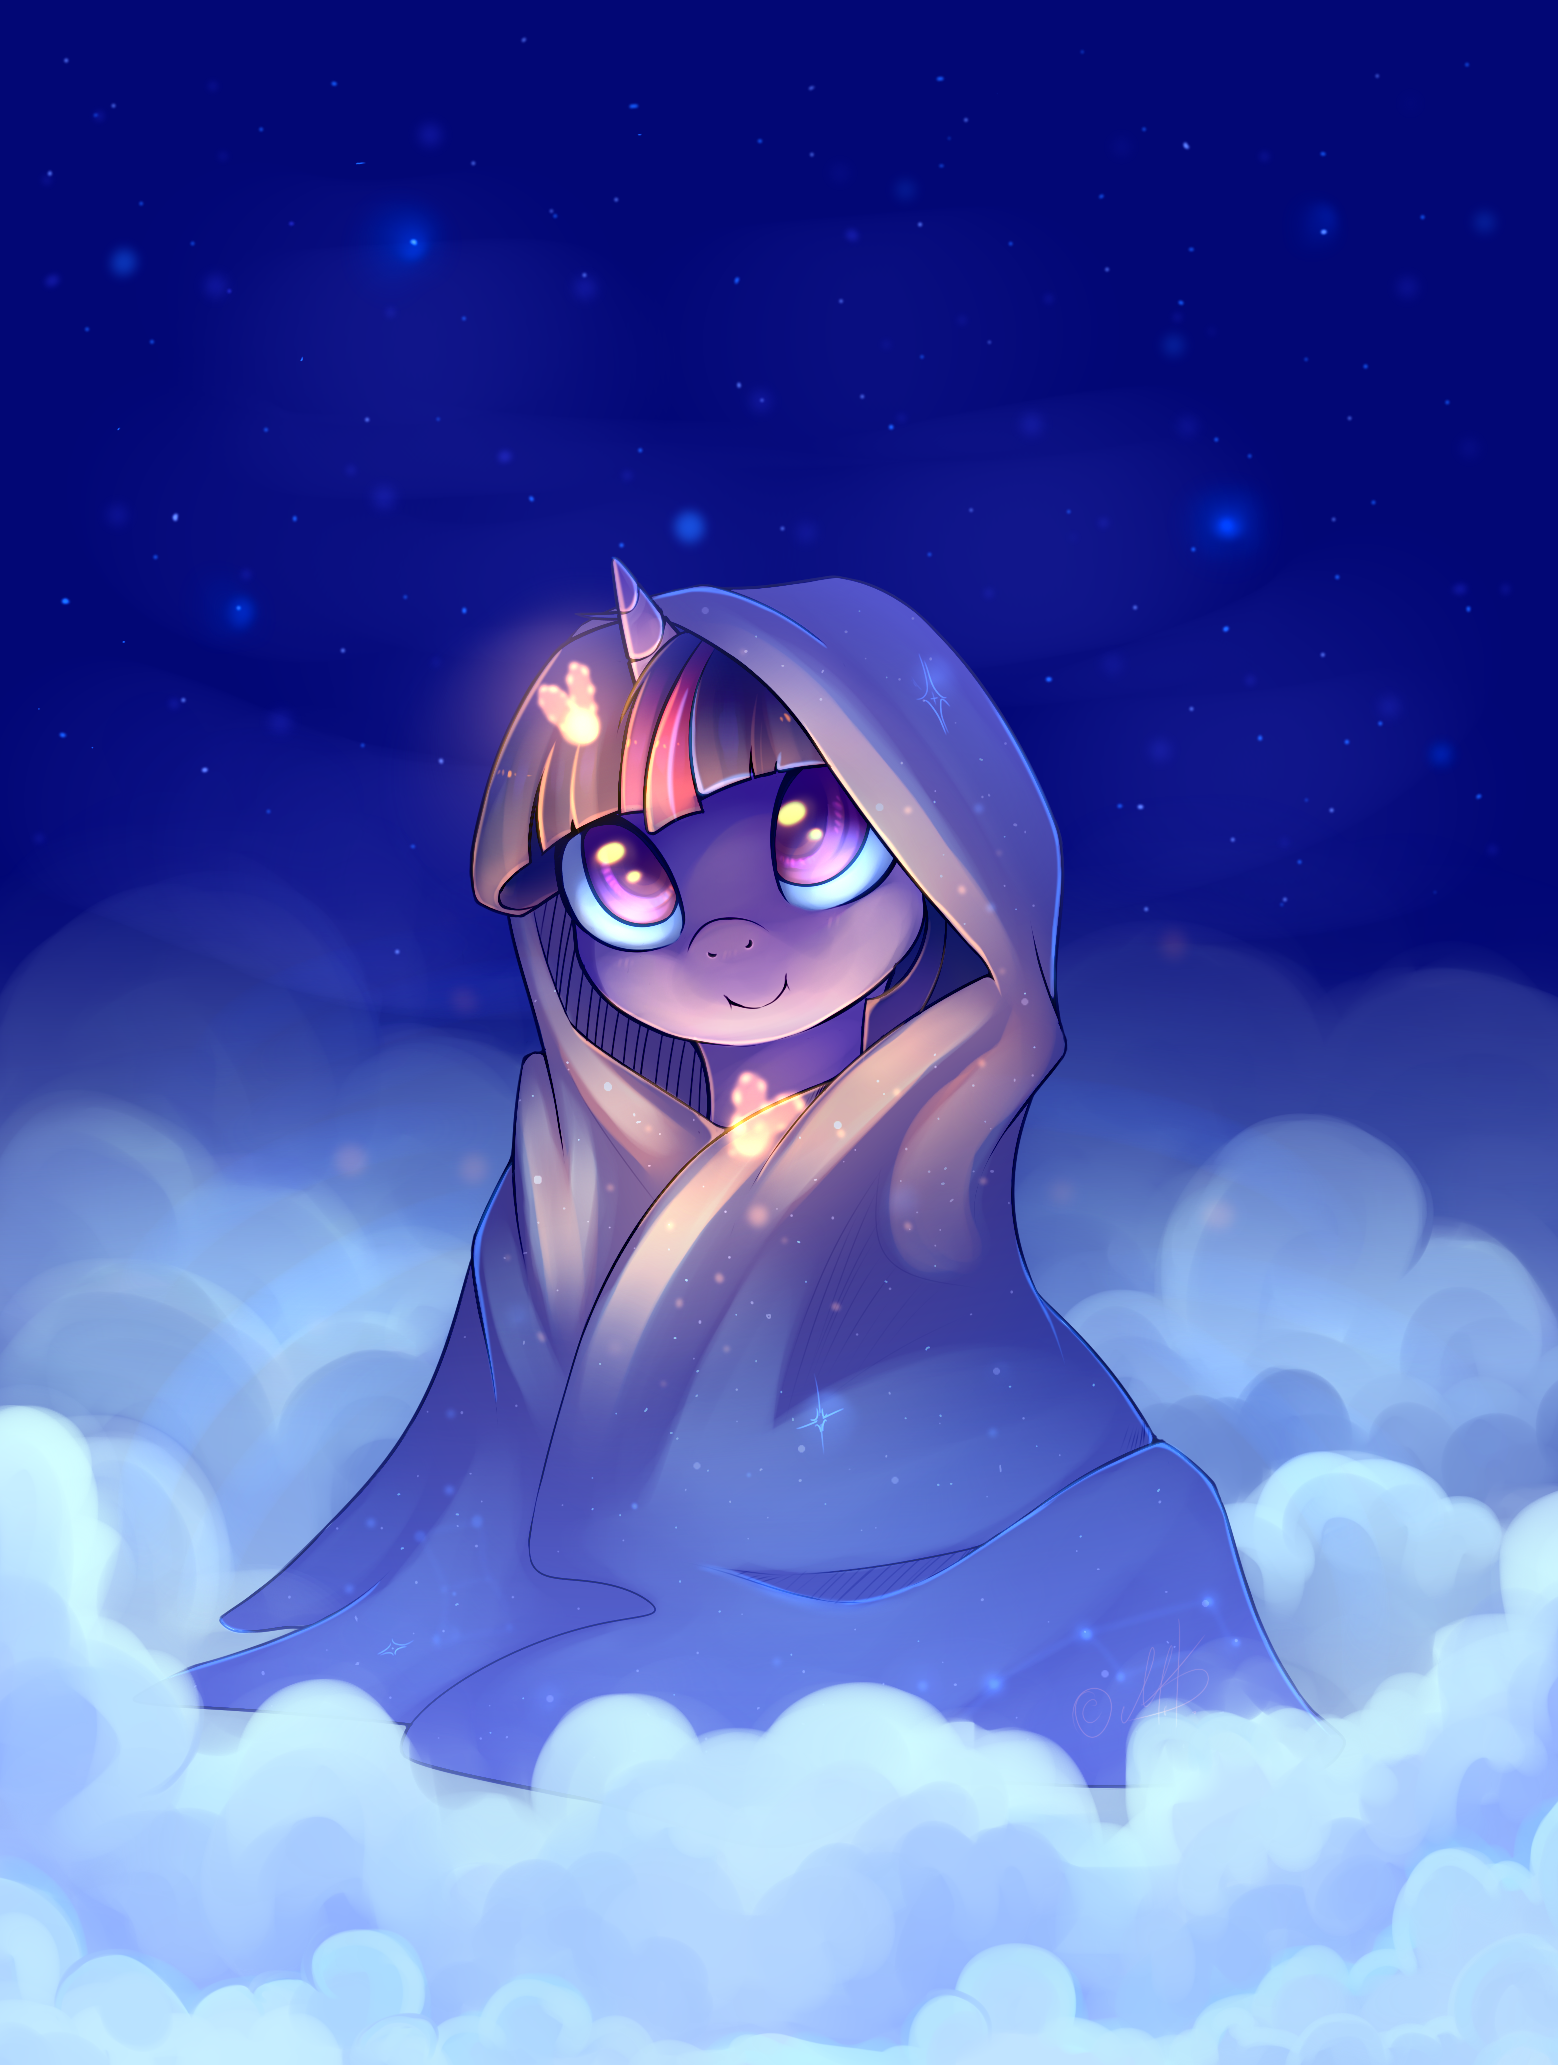 1430866__safe_artist-colon-ghst-dash-qn_artist-colon-sokolas_twilight+sparkle_blanket_cloud_cloudy_colored+pupils_cute_firefly+%28insect%29_night_night.png